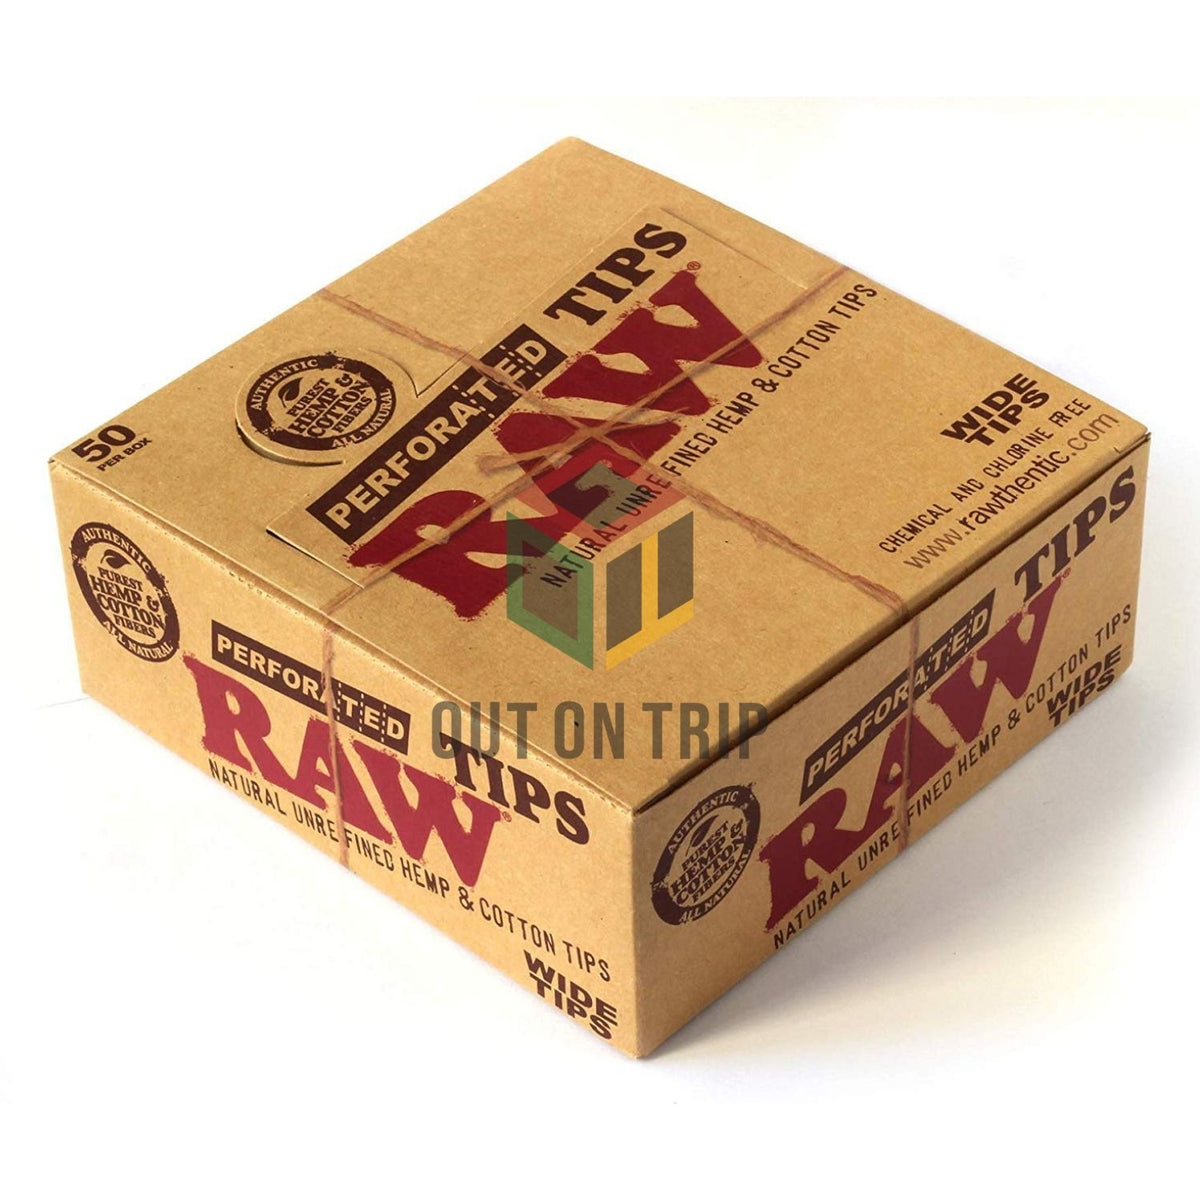 Buy RAW Wide Filter Tips Cigarette & Joints Box Online